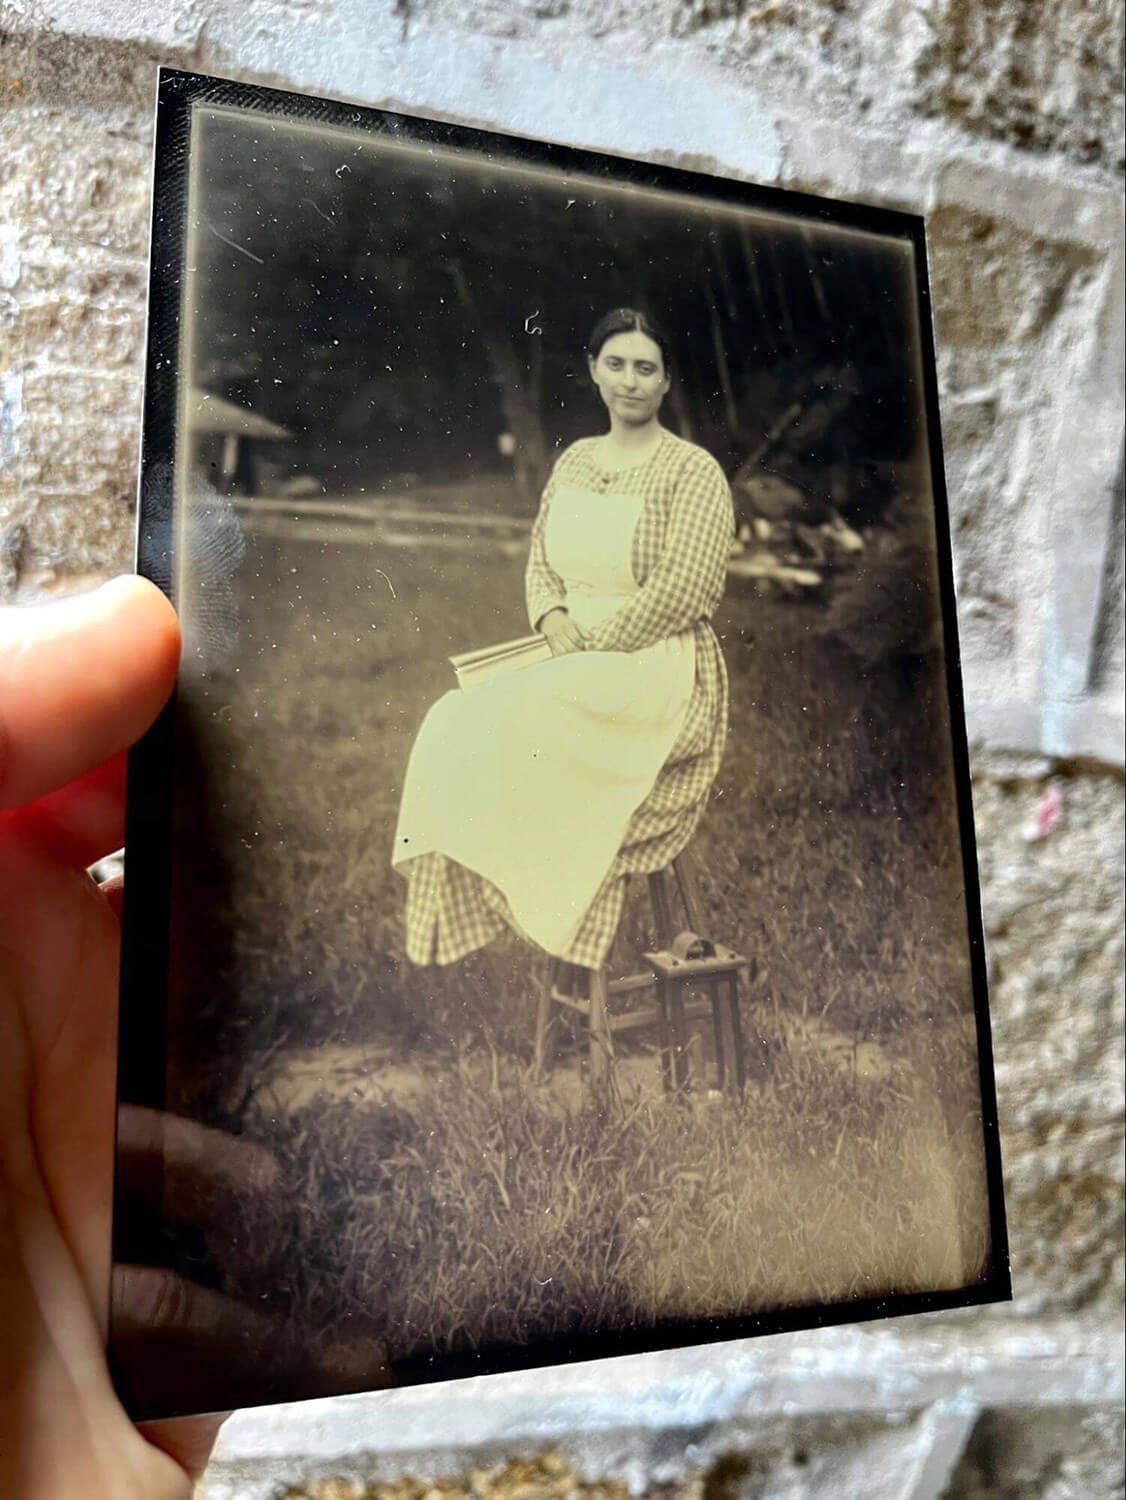 The resulting tintype of Francesca Costa
